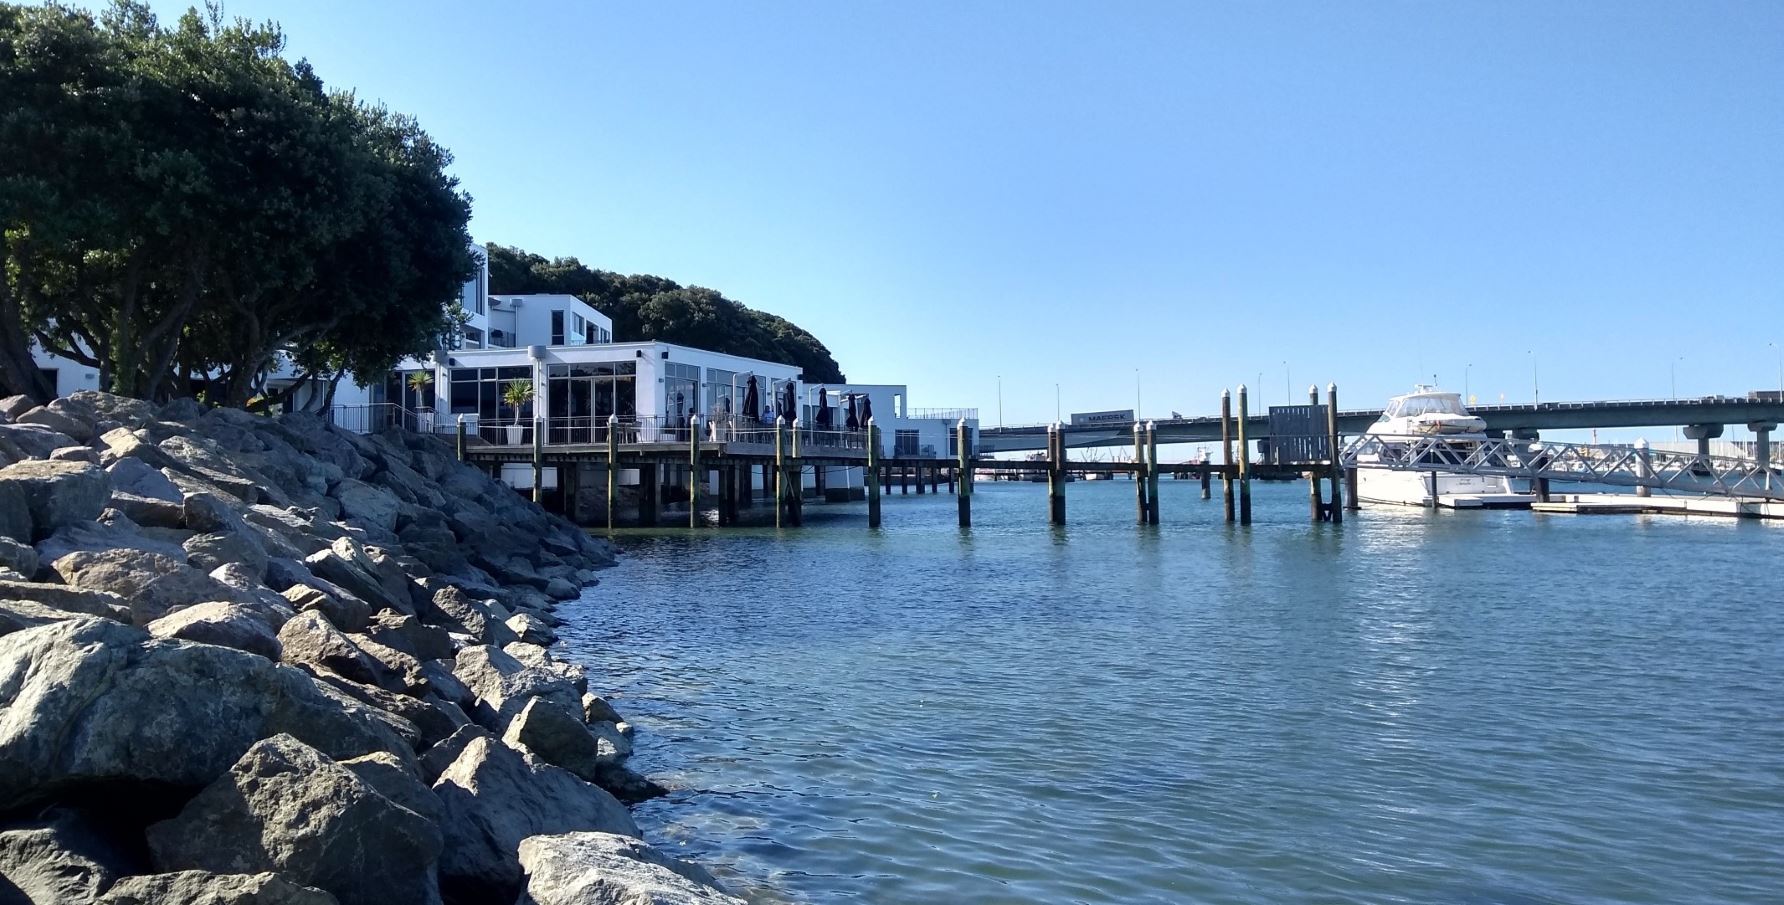 Trinity Wharf jetty on a sunny calm afternoon. A launch is docked at the end on the right. The hotel building is on the left.